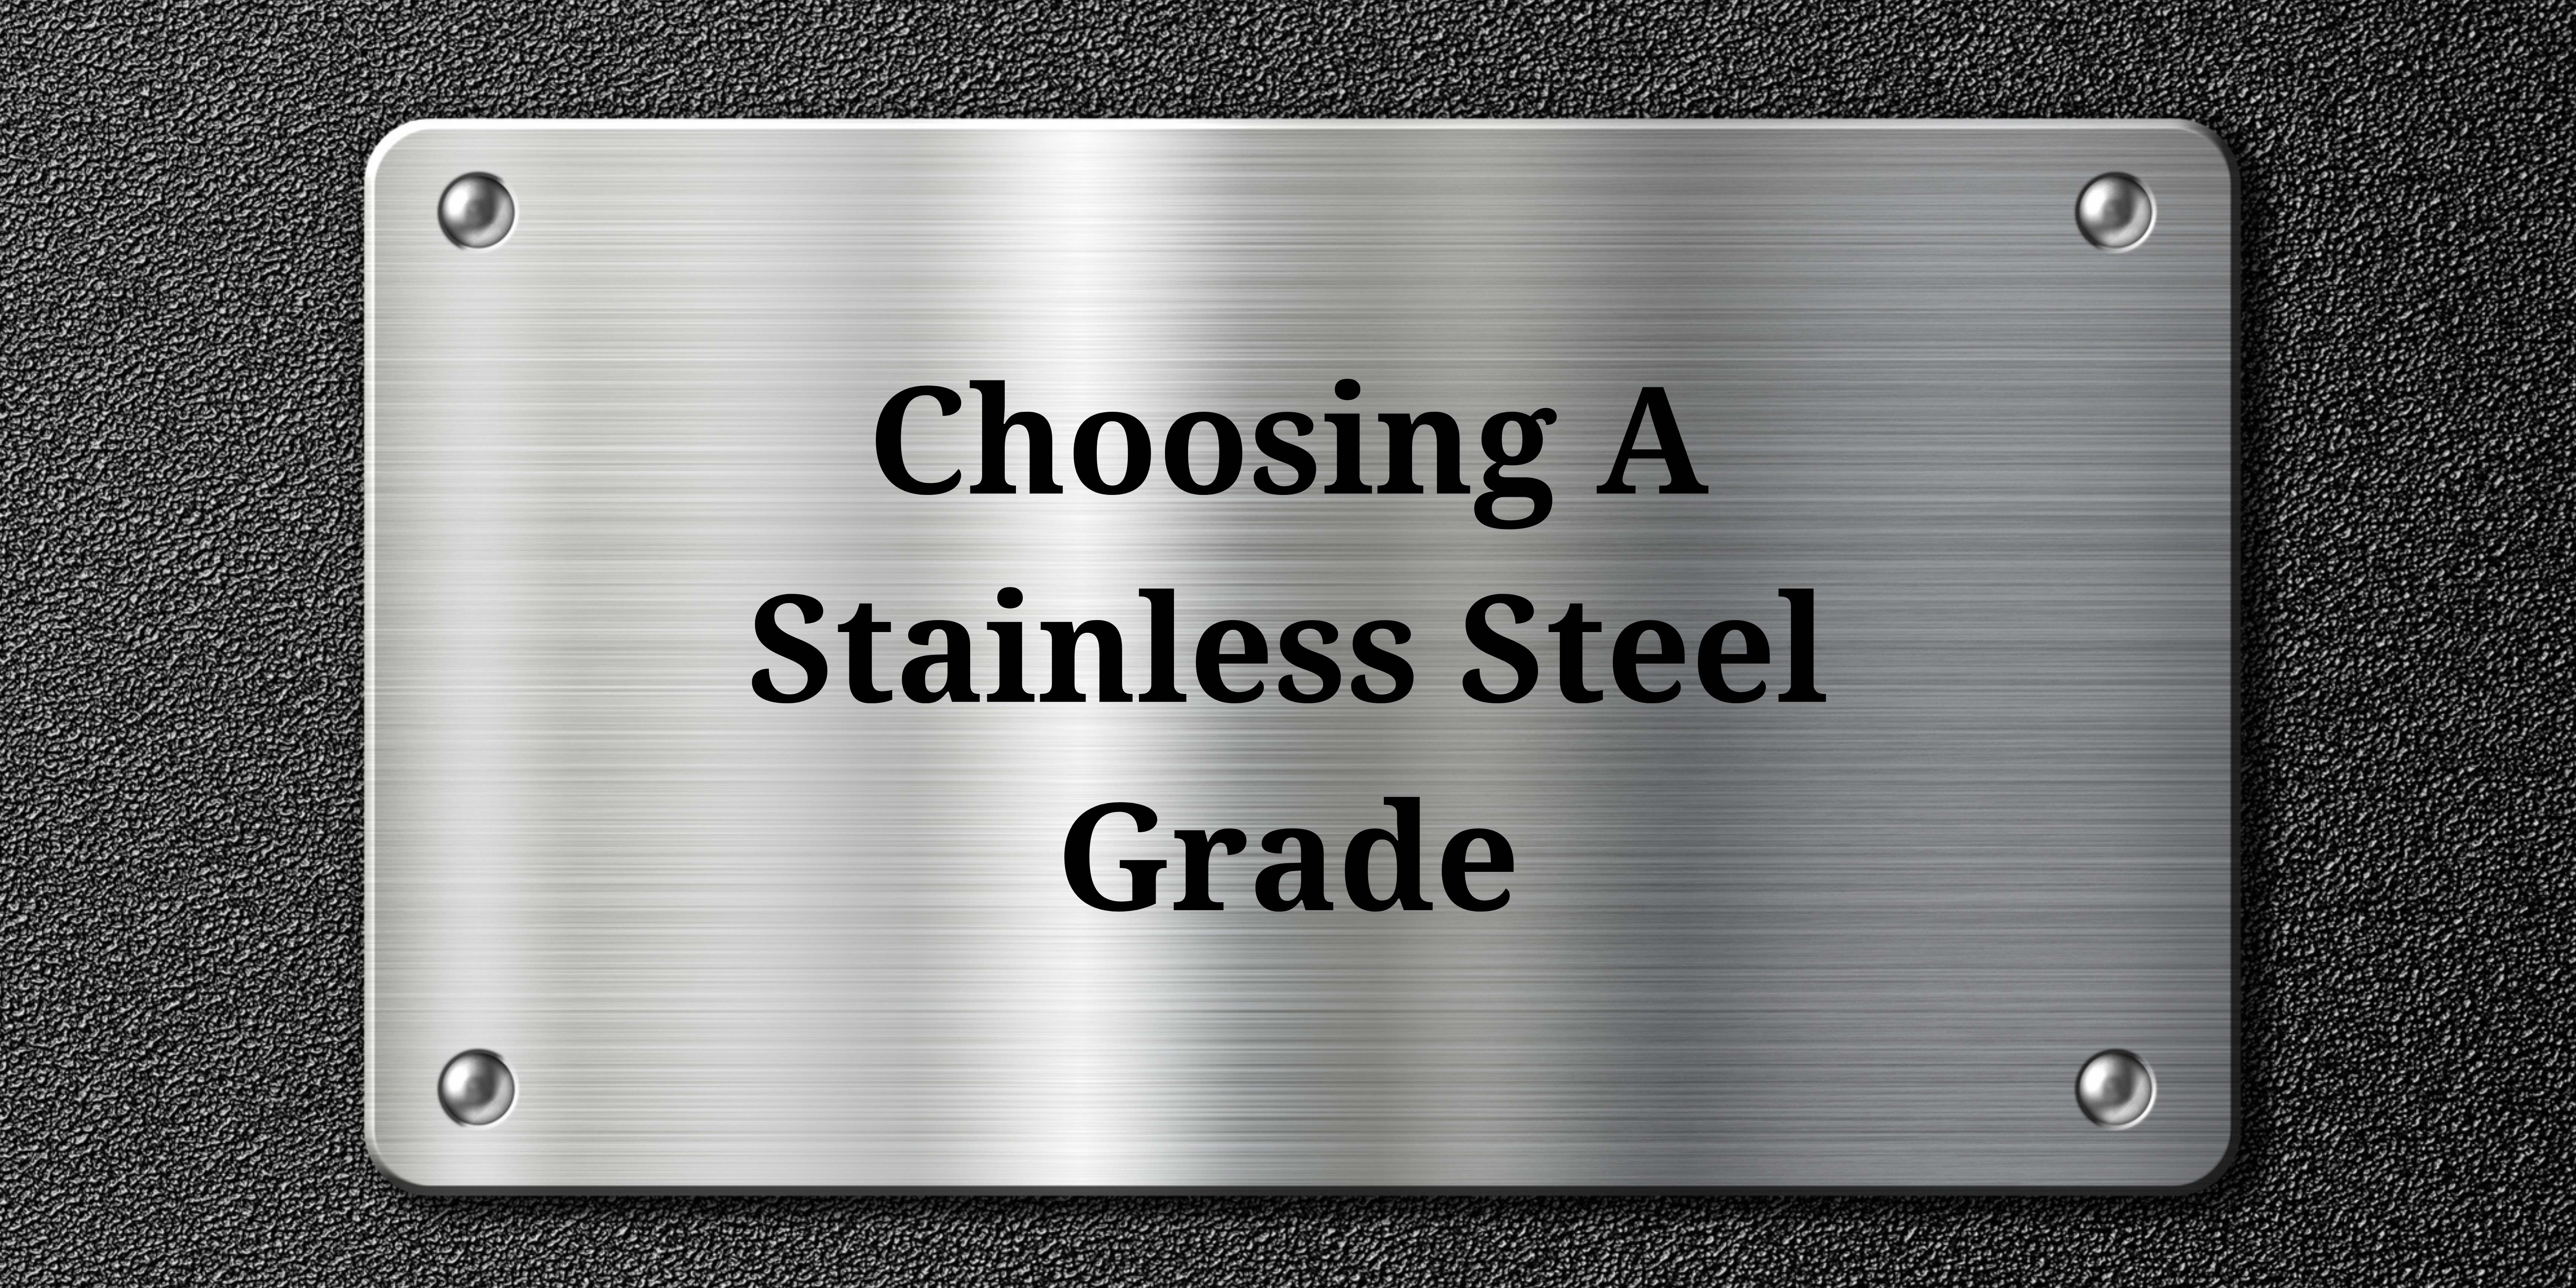 Things to Consider When Choosing a Stainless Steel Grade